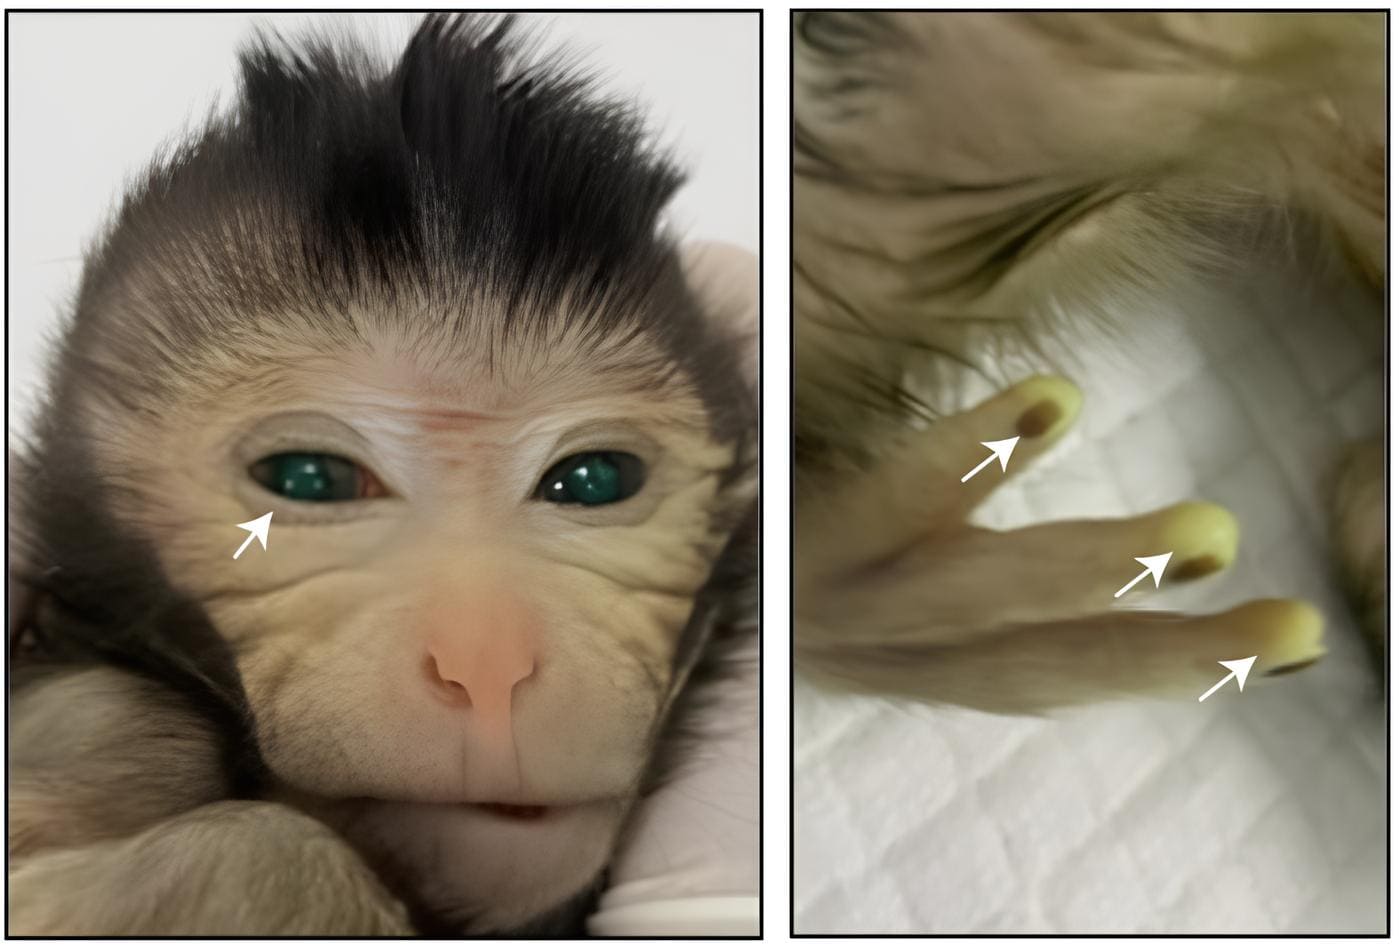 ‘Chimaera’ Monkey With Glowing Fingertips and Eyes Created by Chinese Scientists